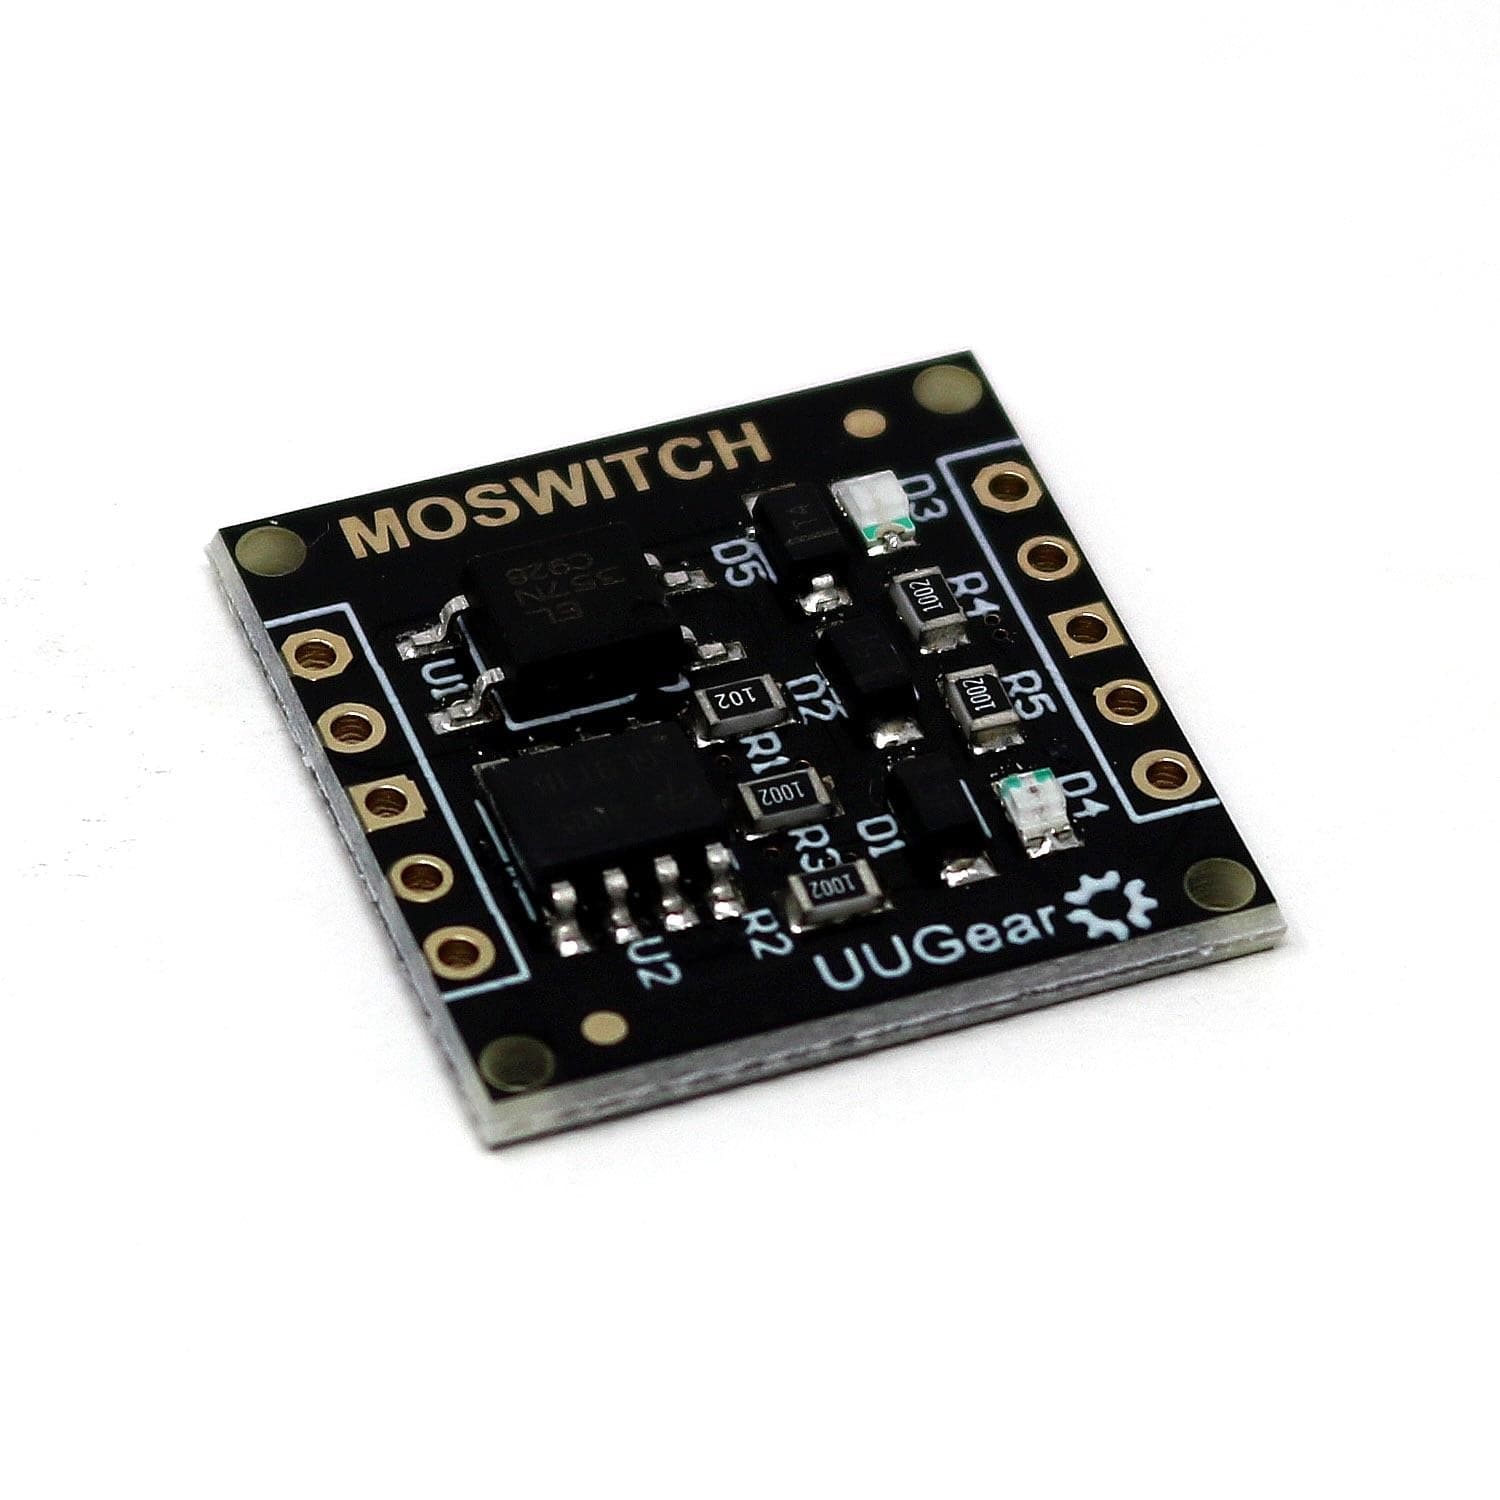 MOSWITCH - 9A/28V SPDT MOSFET Switch - The Pi Hut